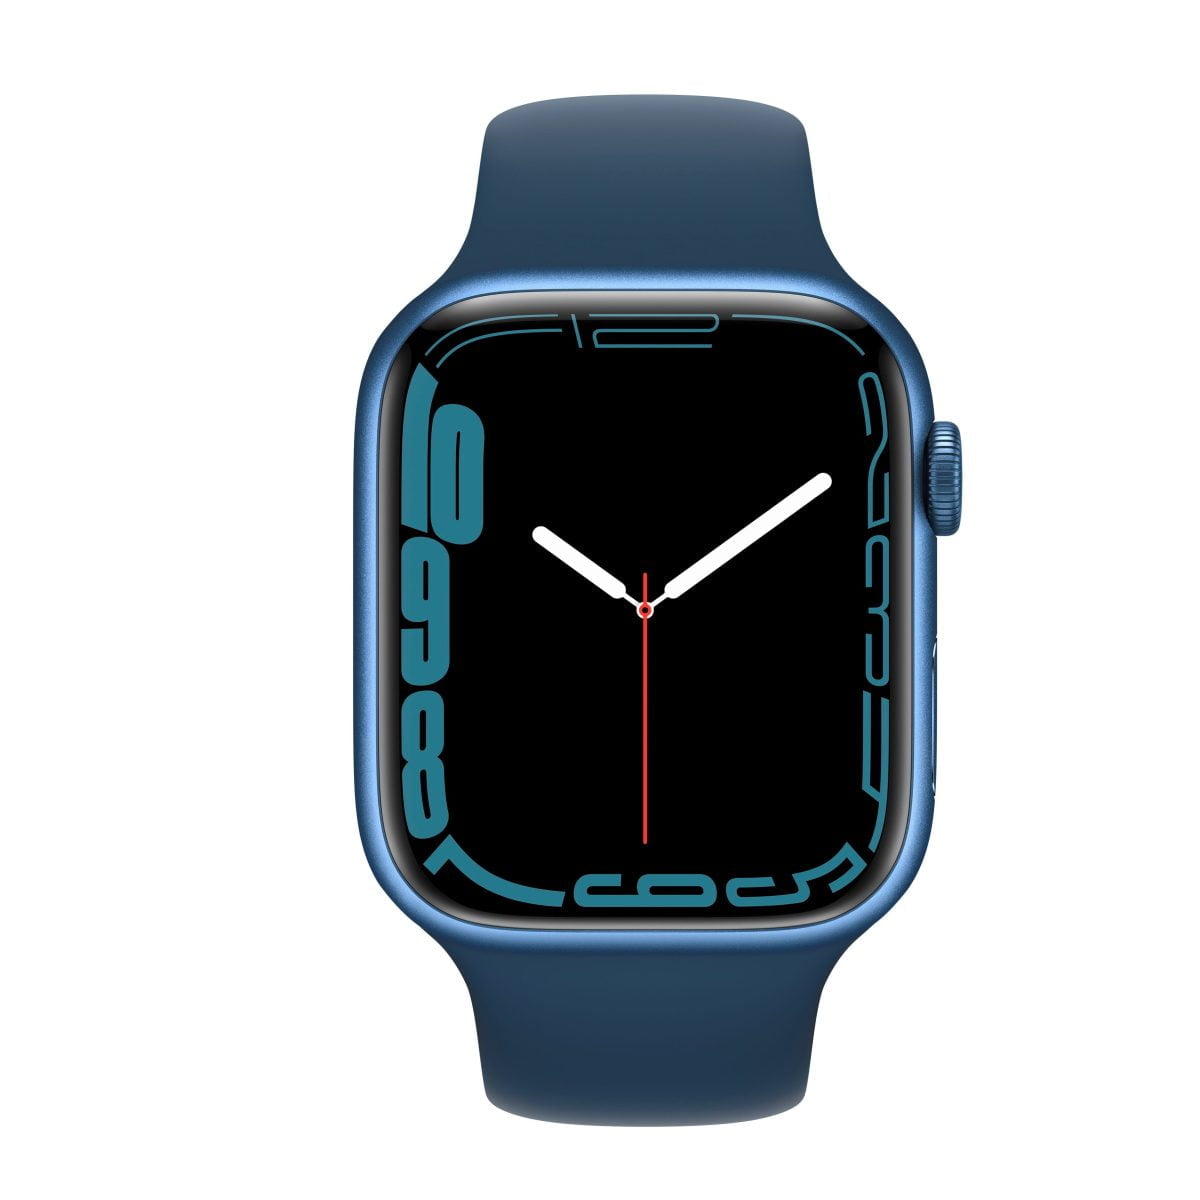 6215942Cv11D Scaled Apple &Lt;H1 Class=&Quot;Heading-5 V-Fw-Regular&Quot;&Gt;Apple Watch Series 7 (Gps) 45Mm Blue Aluminum Case With Abyss Blue Sport Band - Blue&Lt;/H1&Gt; &Lt;H2&Gt;Model : Mkn83&Lt;/H2&Gt; Https://Www.youtube.com/Watch?V=Mmdq-Gwbnze &Lt;Div Class=&Quot;Long-Description-Container Body-Copy &Quot;&Gt; &Lt;Div Class=&Quot;Html-Fragment&Quot;&Gt; &Lt;Div&Gt; &Lt;Div&Gt;The Largest, Most Advanced Always-On Retina Display Yet Makes Everything You Do With Your Apple Watch Series 7 Bigger And Better. Series 7 Is The Most Durable Apple Watch Ever Built, With An Even More Crack-Resistant Front Crystal. Advanced Features Let You Measure Your Blood Oxygen Level,¹ Take An Ecg Anytime, And Access Mindfulness And Sleep Tracking Apps. You Can Also Track Dozens Of Workouts, Including New Tai Chi And Pilates.&Lt;/Div&Gt; &Lt;/Div&Gt; &Lt;/Div&Gt; &Lt;/Div&Gt; Apple Watch Apple Watch Series 7 (Gps) 45Mm - Blue